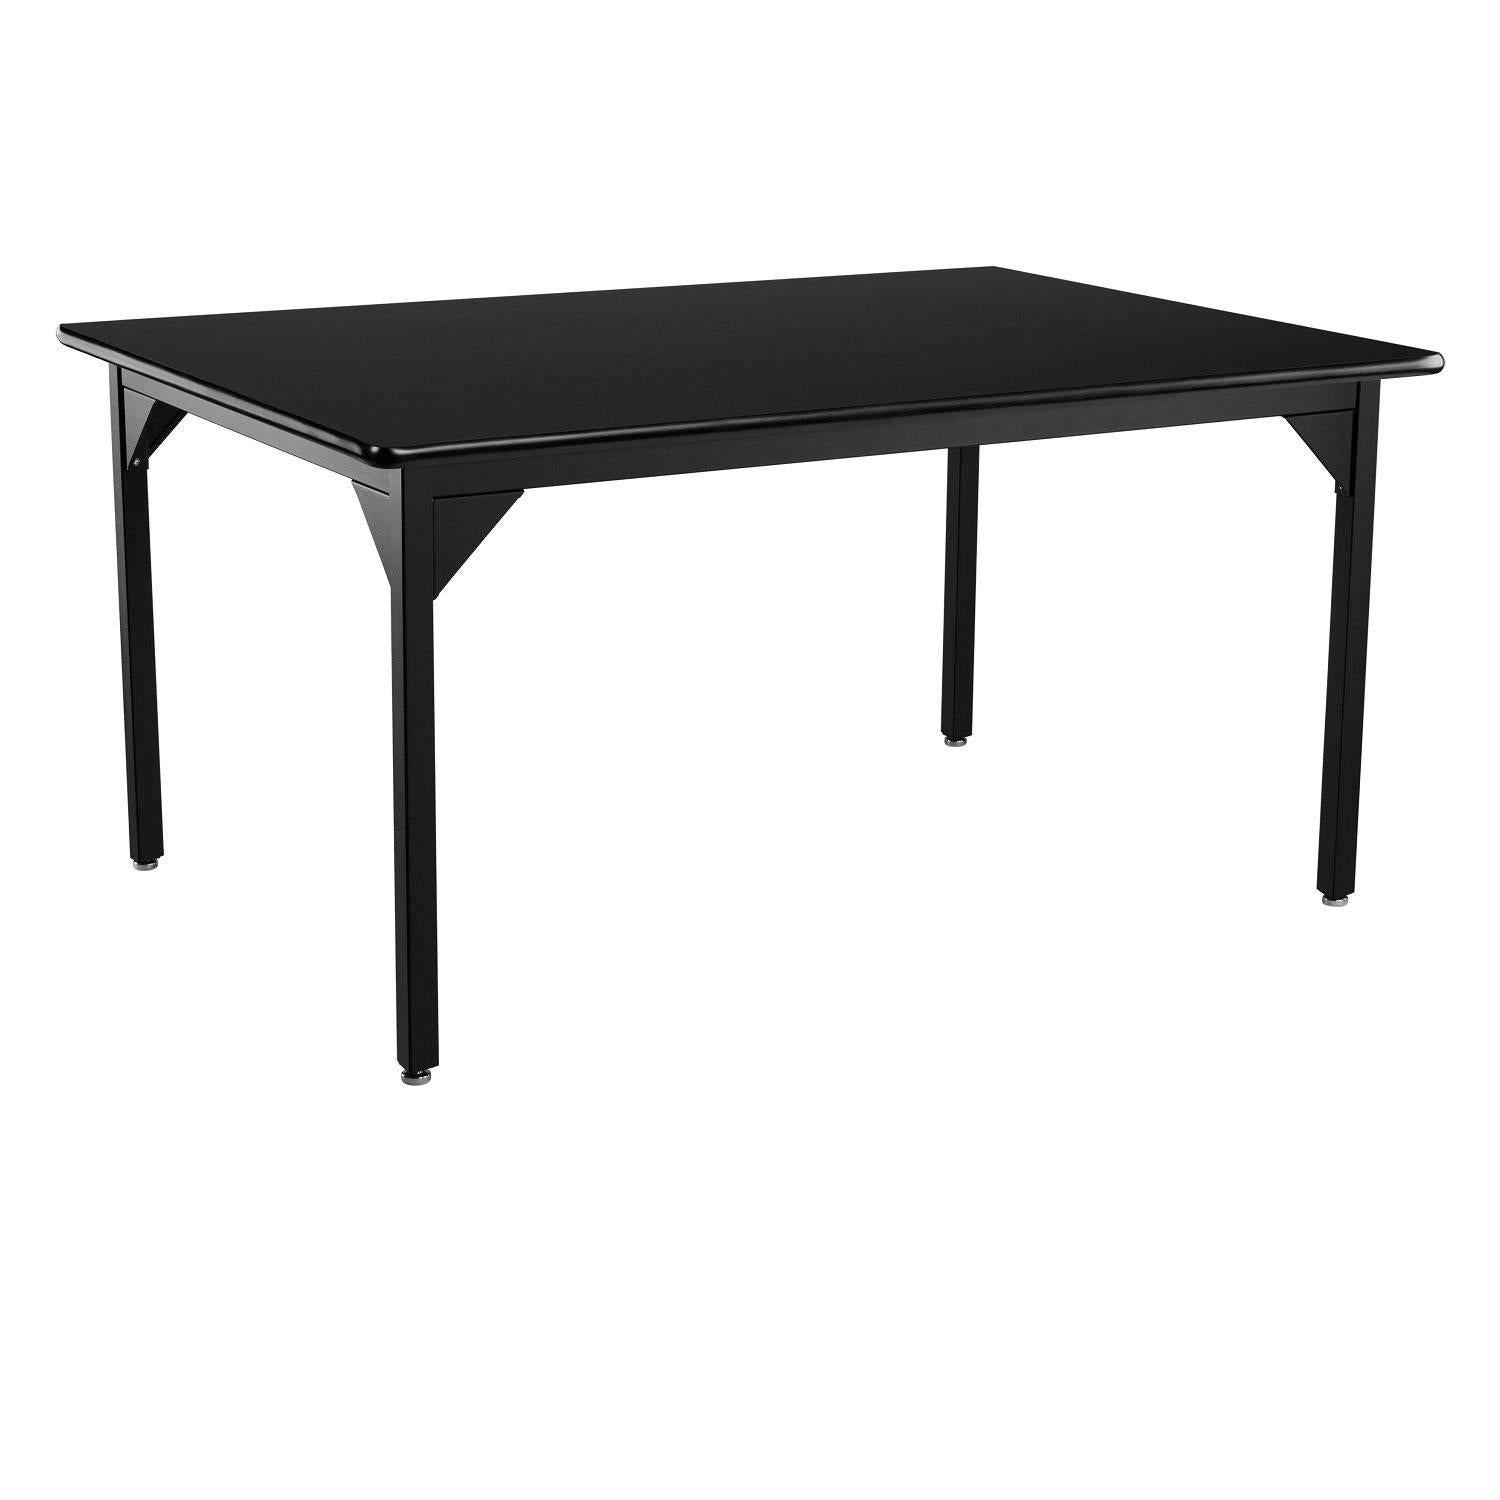 Heavy-Duty Fixed Height Utility Table, Black Frame, 42" x 42", High-Pressure Laminate Top with T-Mold Edge